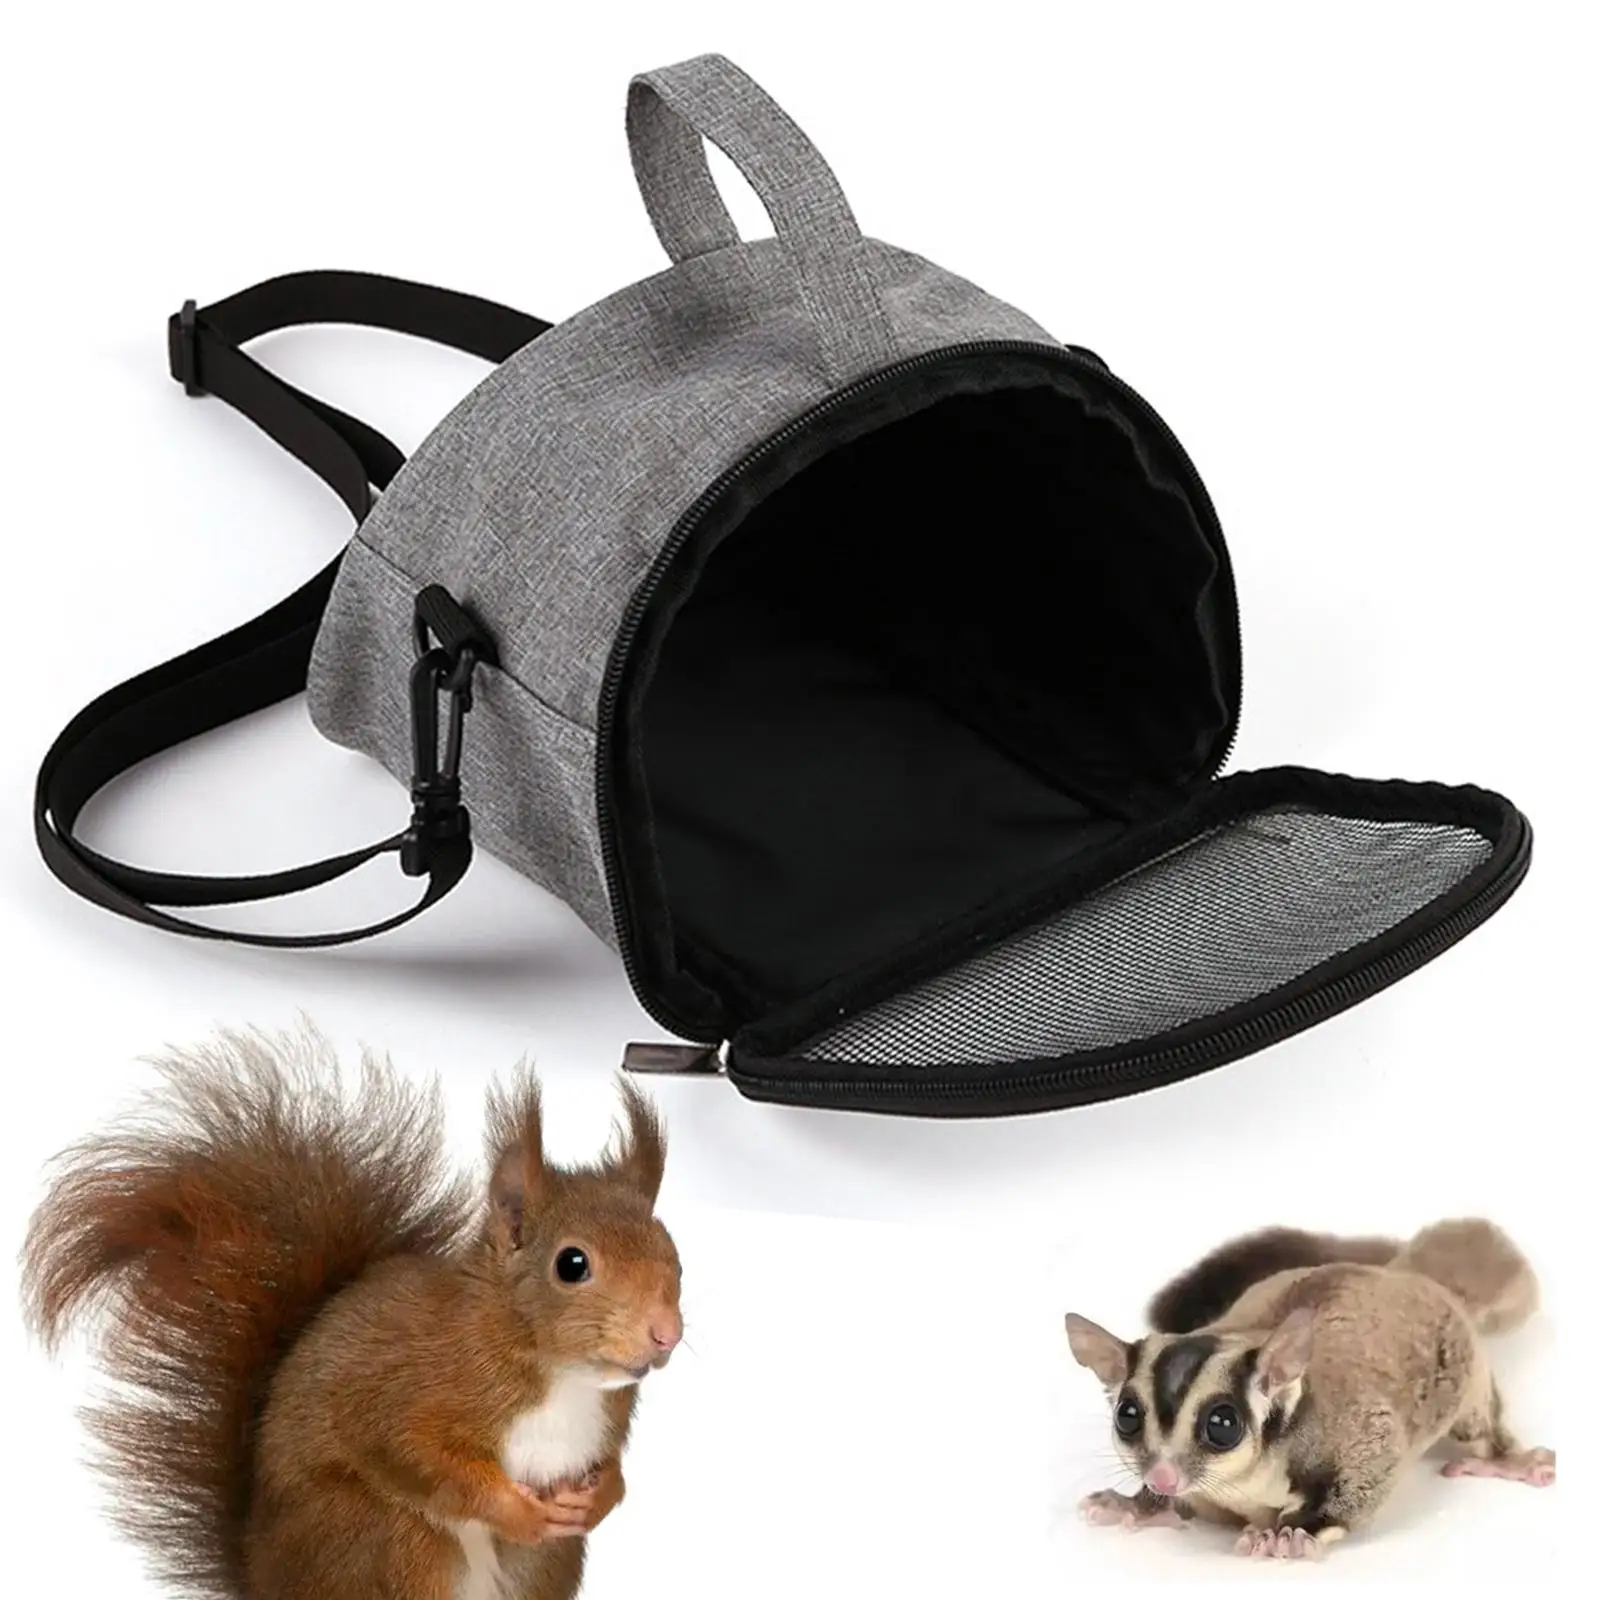 Hamster Carrier Small Pet Supplies Guinea Pig Travel Transport Bag Easy Carrying Zipper Outdoor Tote Pouch for Outdoor Hiking